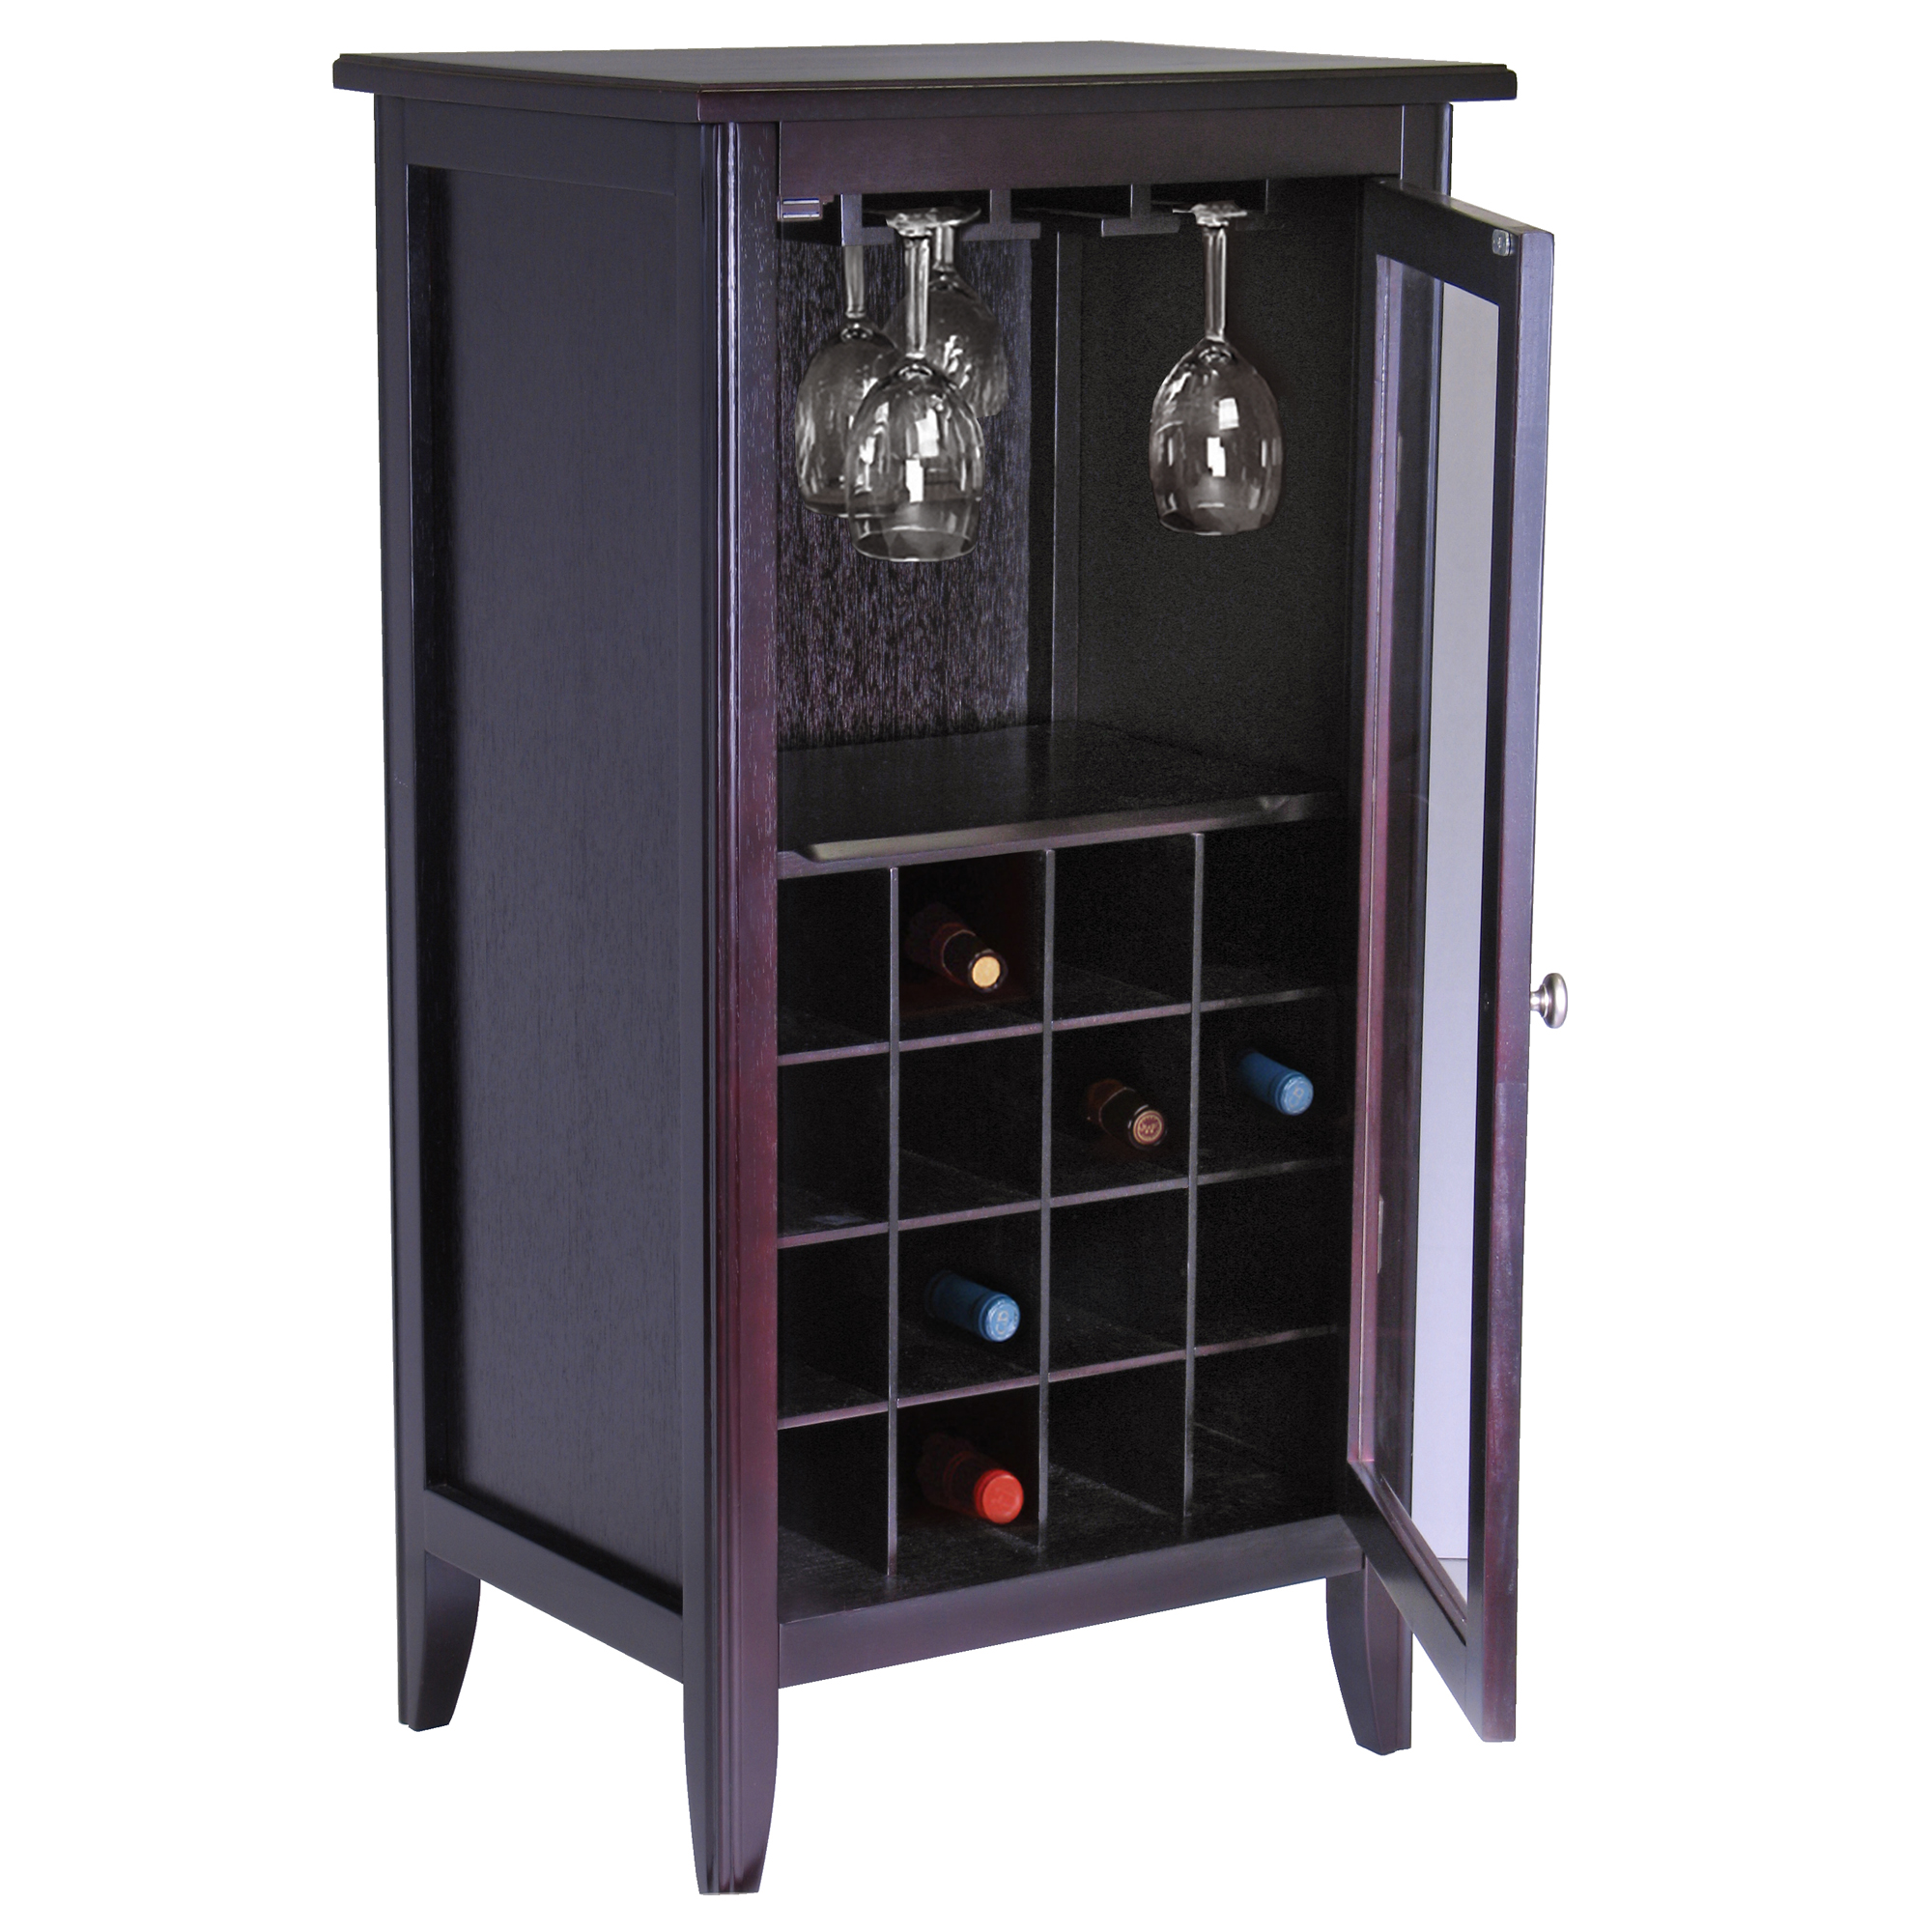 Winsome Wood Ryan 16-Bottle Wine Cabinet with Display Glass Door, Espresso Finish - image 5 of 5